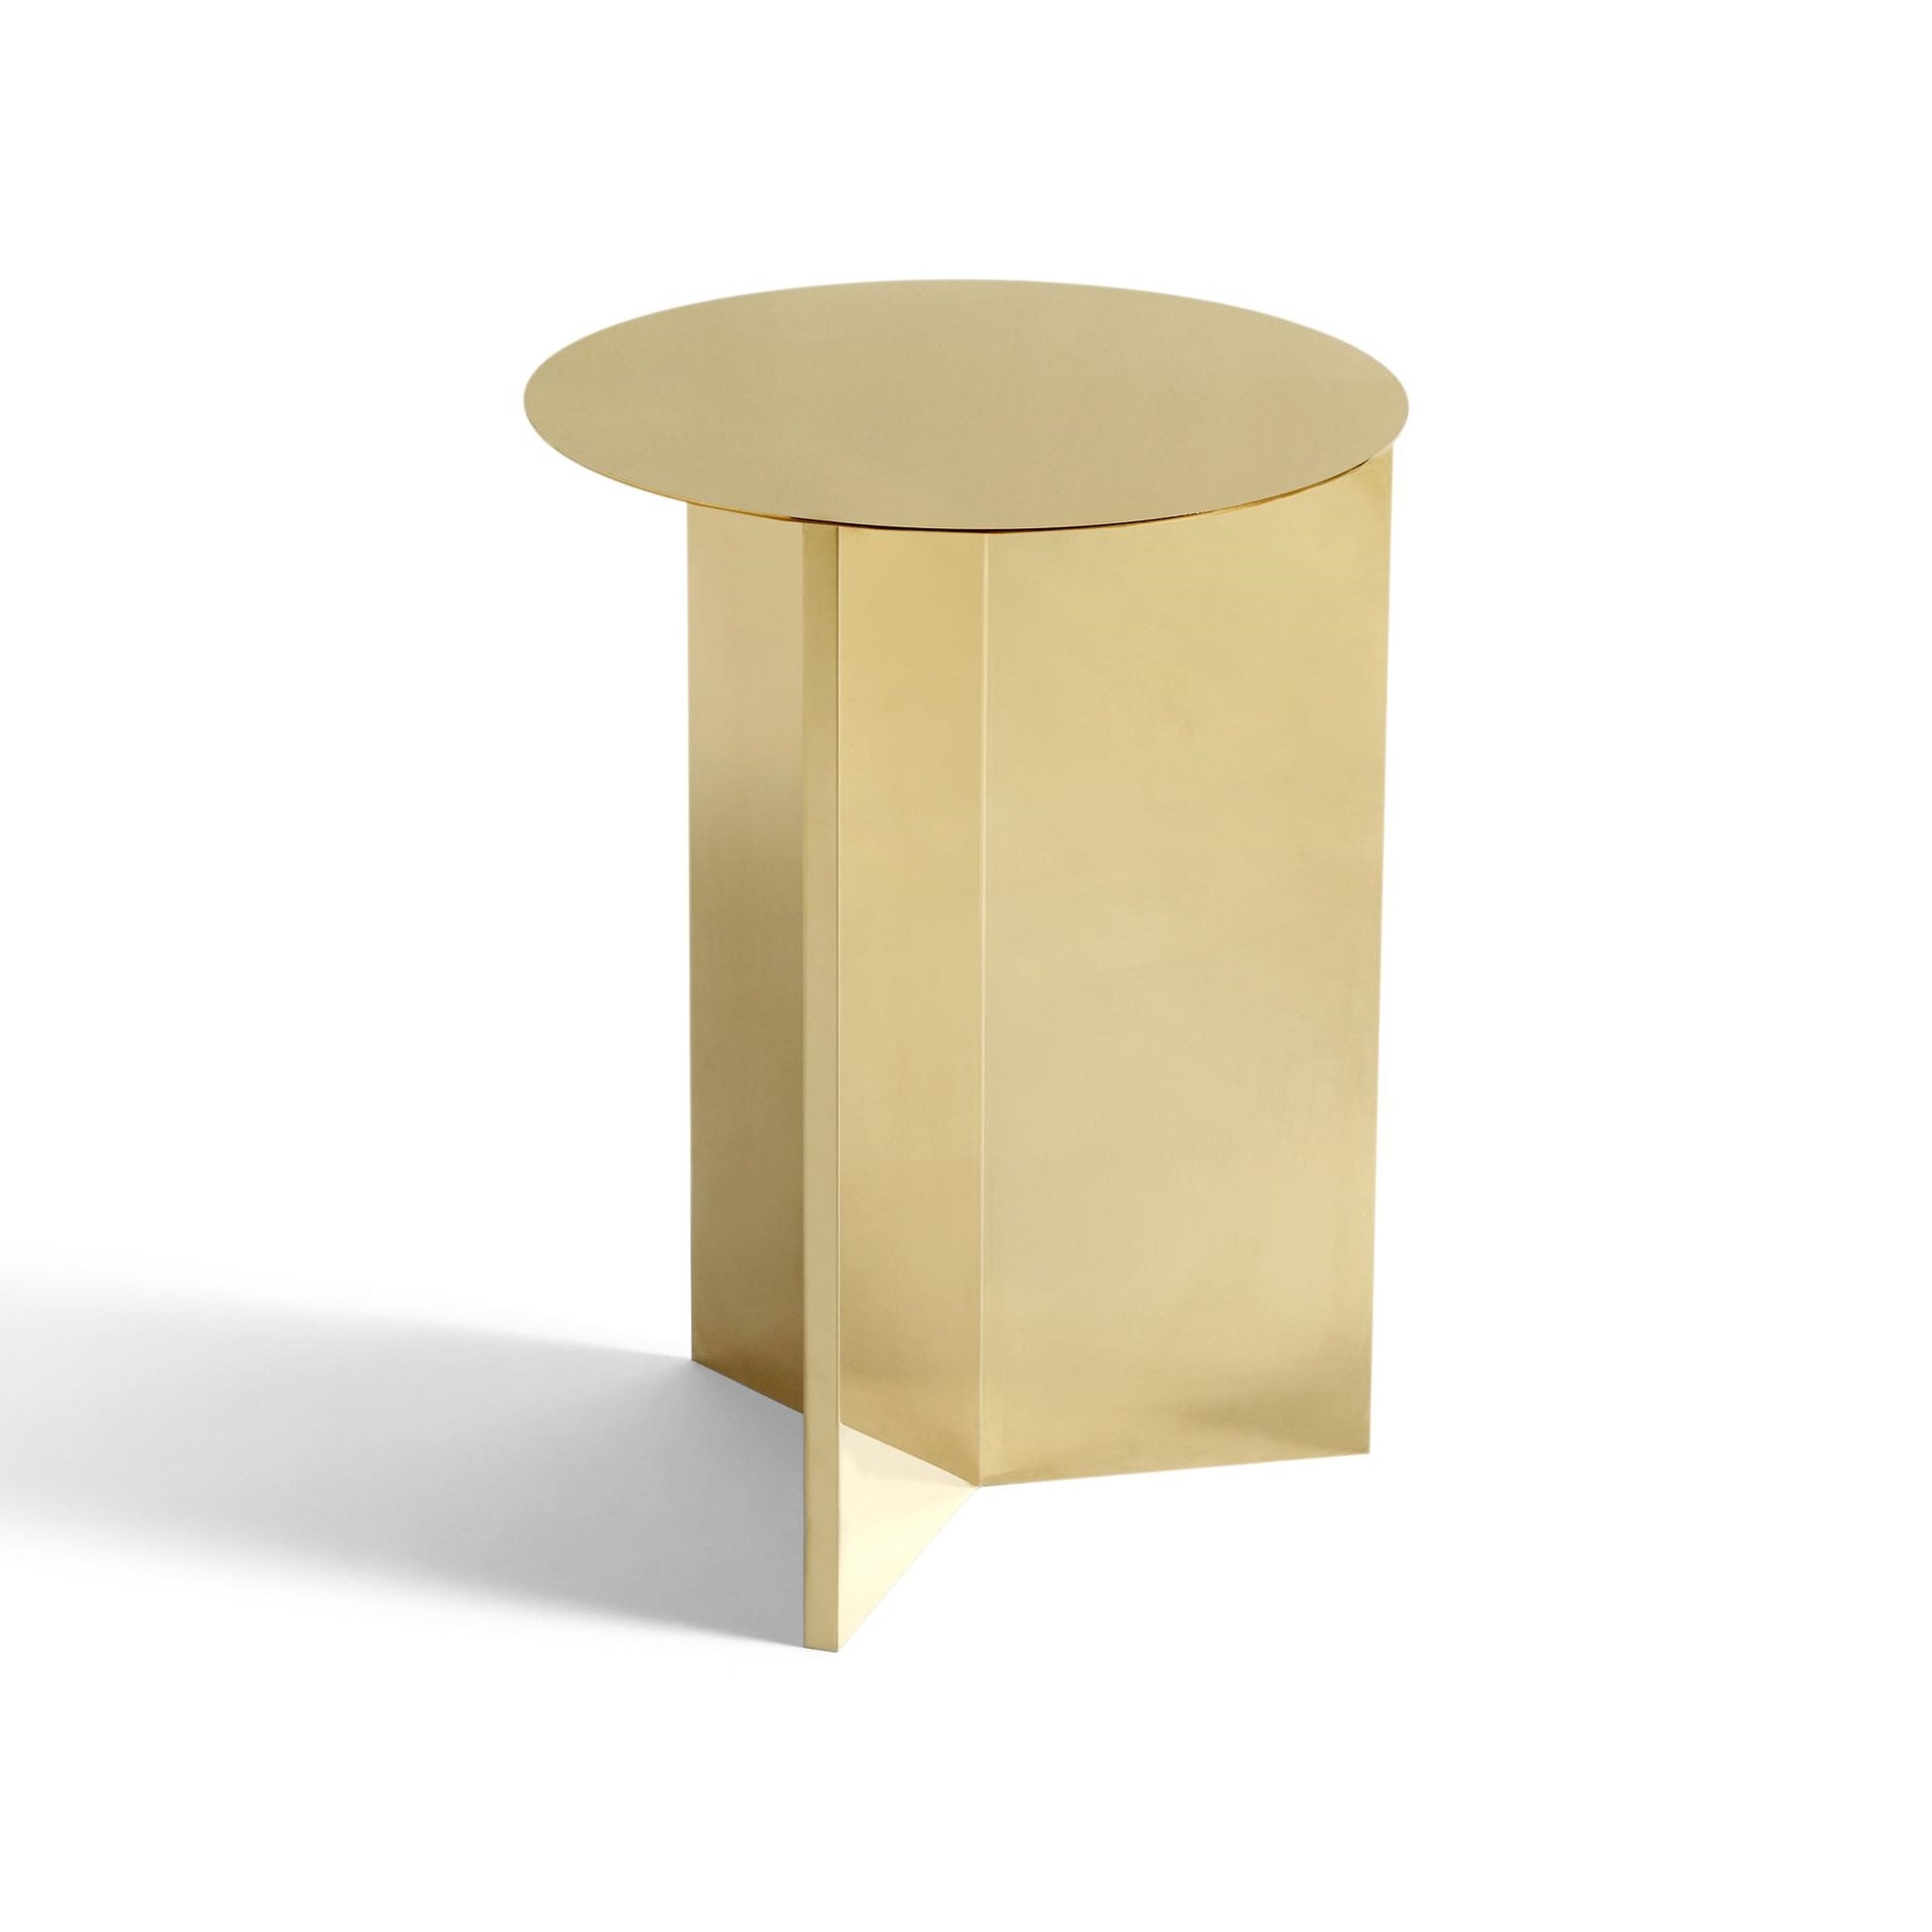 Slit Coffee Table Round Ø35 by HAY #Brass